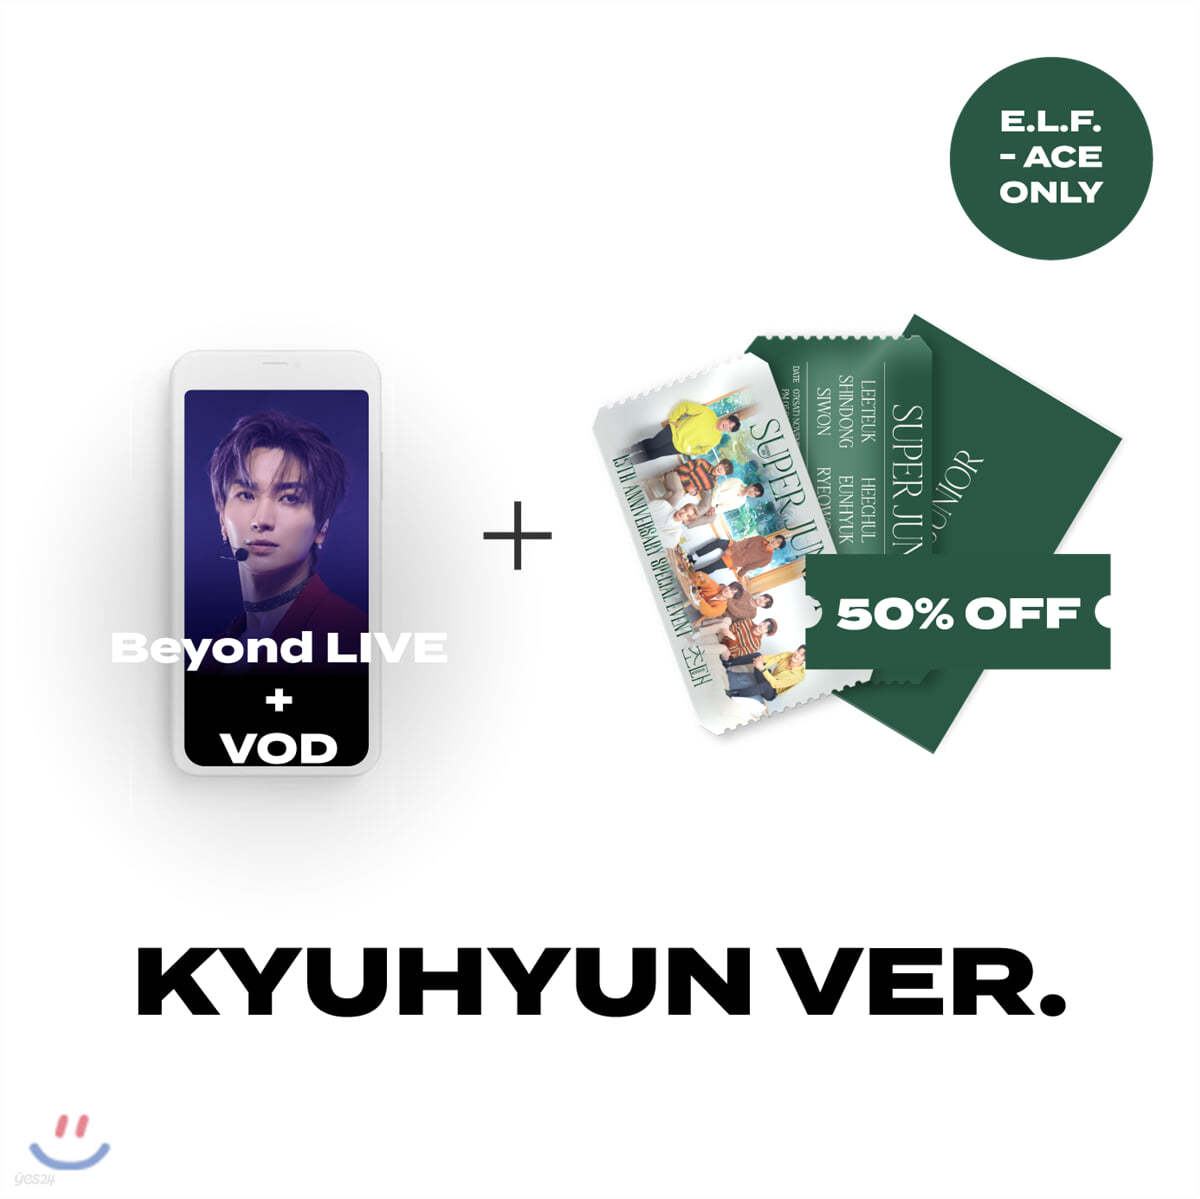 [E.L.F. ACE ONLY] [KYUHYUN] Beyond LIVE + VOD관람권 + POP-UP CARD + AR TICKET SET- SUPER JUNIOR 15th Anniversary Special Event - 초대(Invitation)